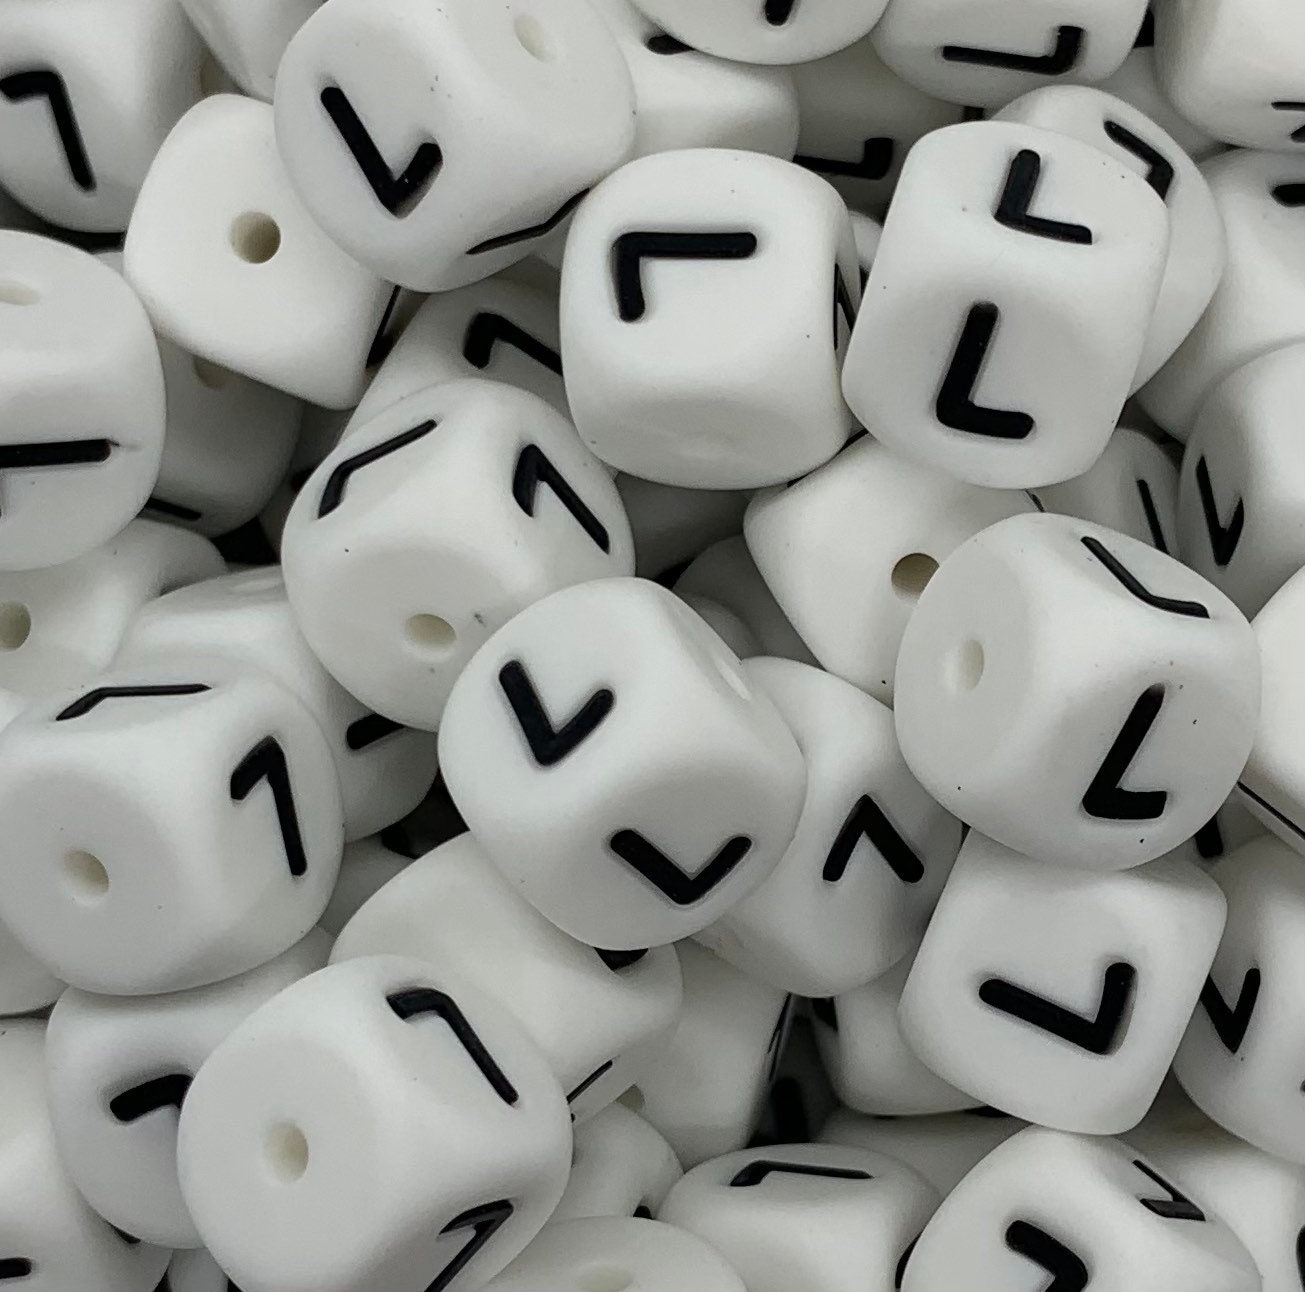 ARTSIM 50pcs White Silicone Loose Beads Russian Letters Square Beads DIY  Bracelets Keychains Pendants Making Alphabet Beads (Color : Mix Letters